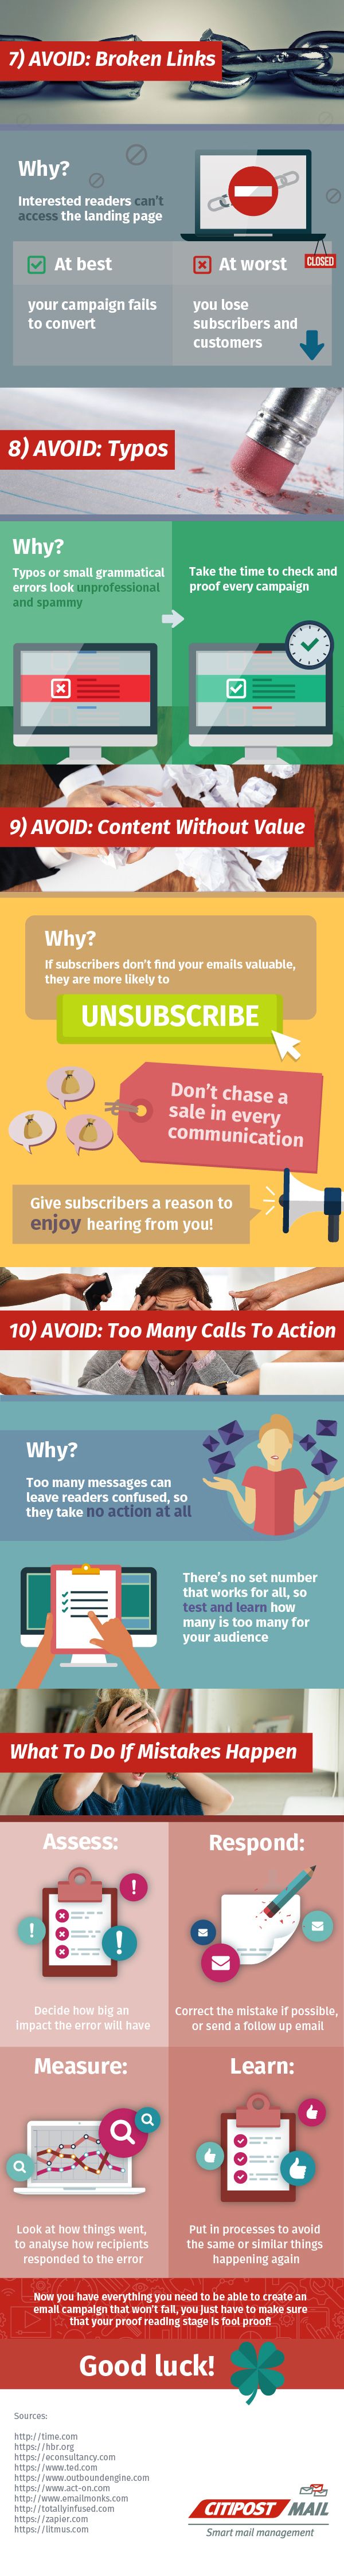 Email campaign infographic st2 2